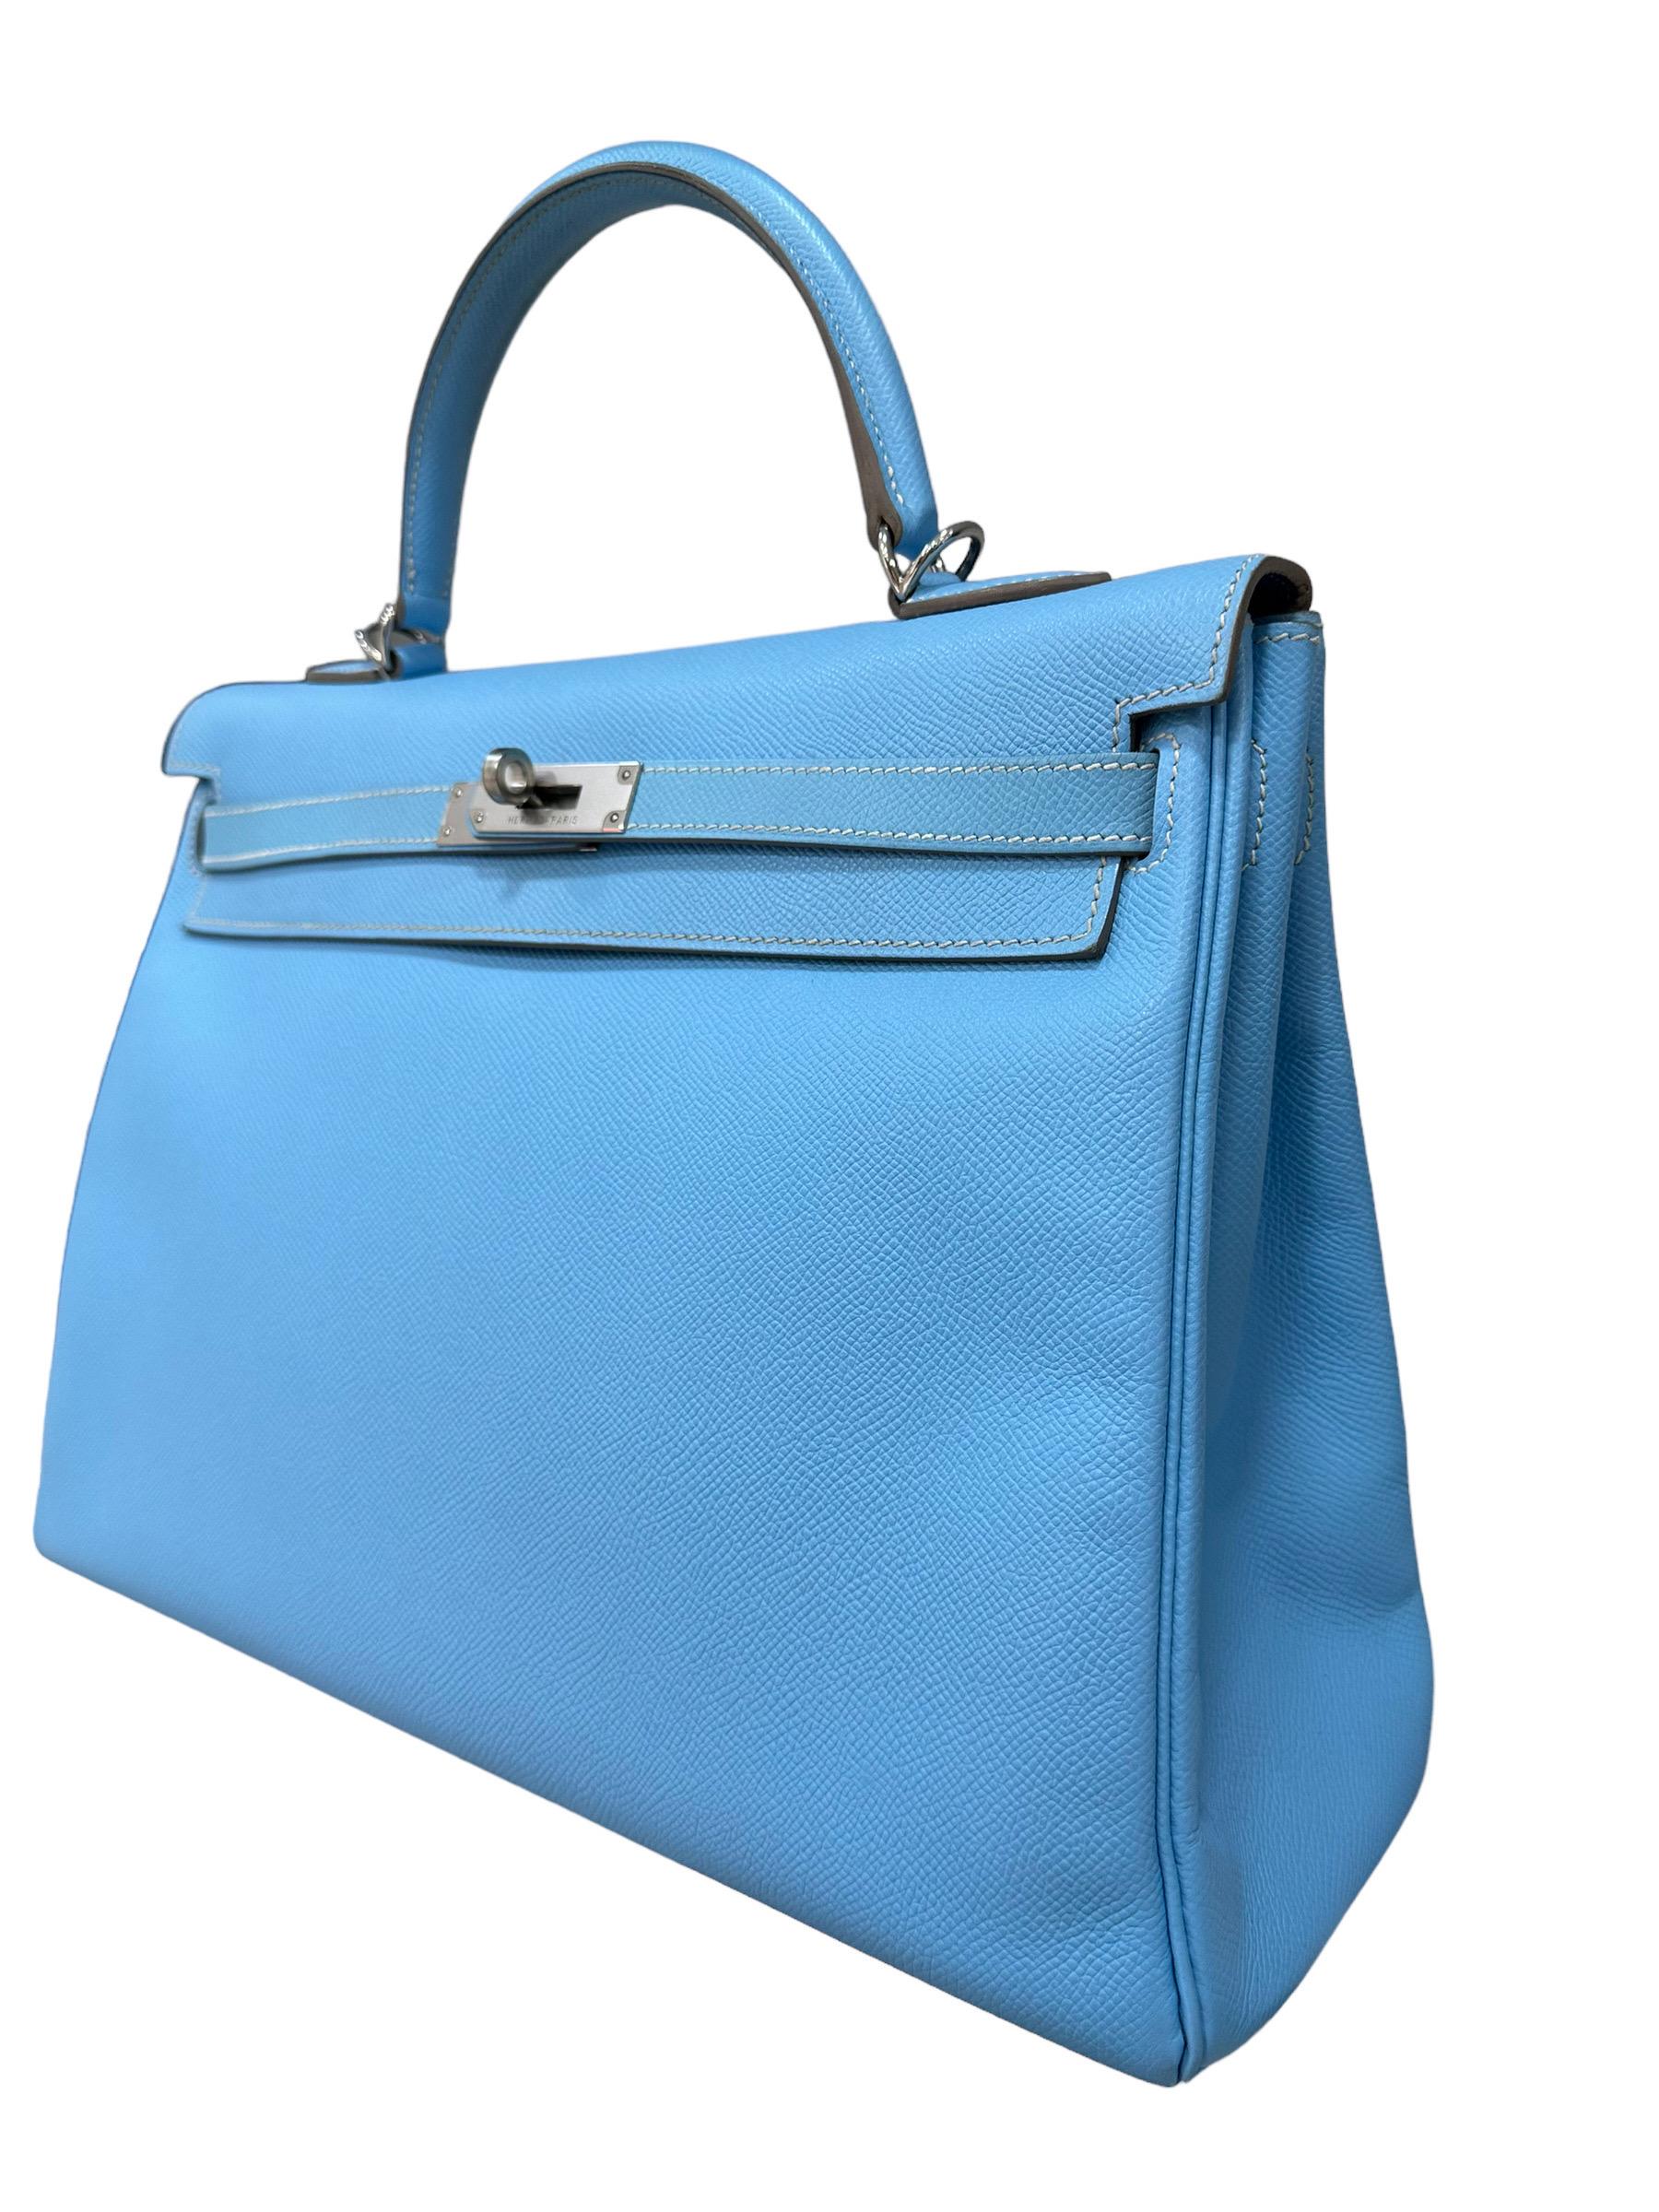 Hermès Kelly 35 Epsom Bleu Paradise 2011 In Excellent Condition For Sale In Torre Del Greco, IT